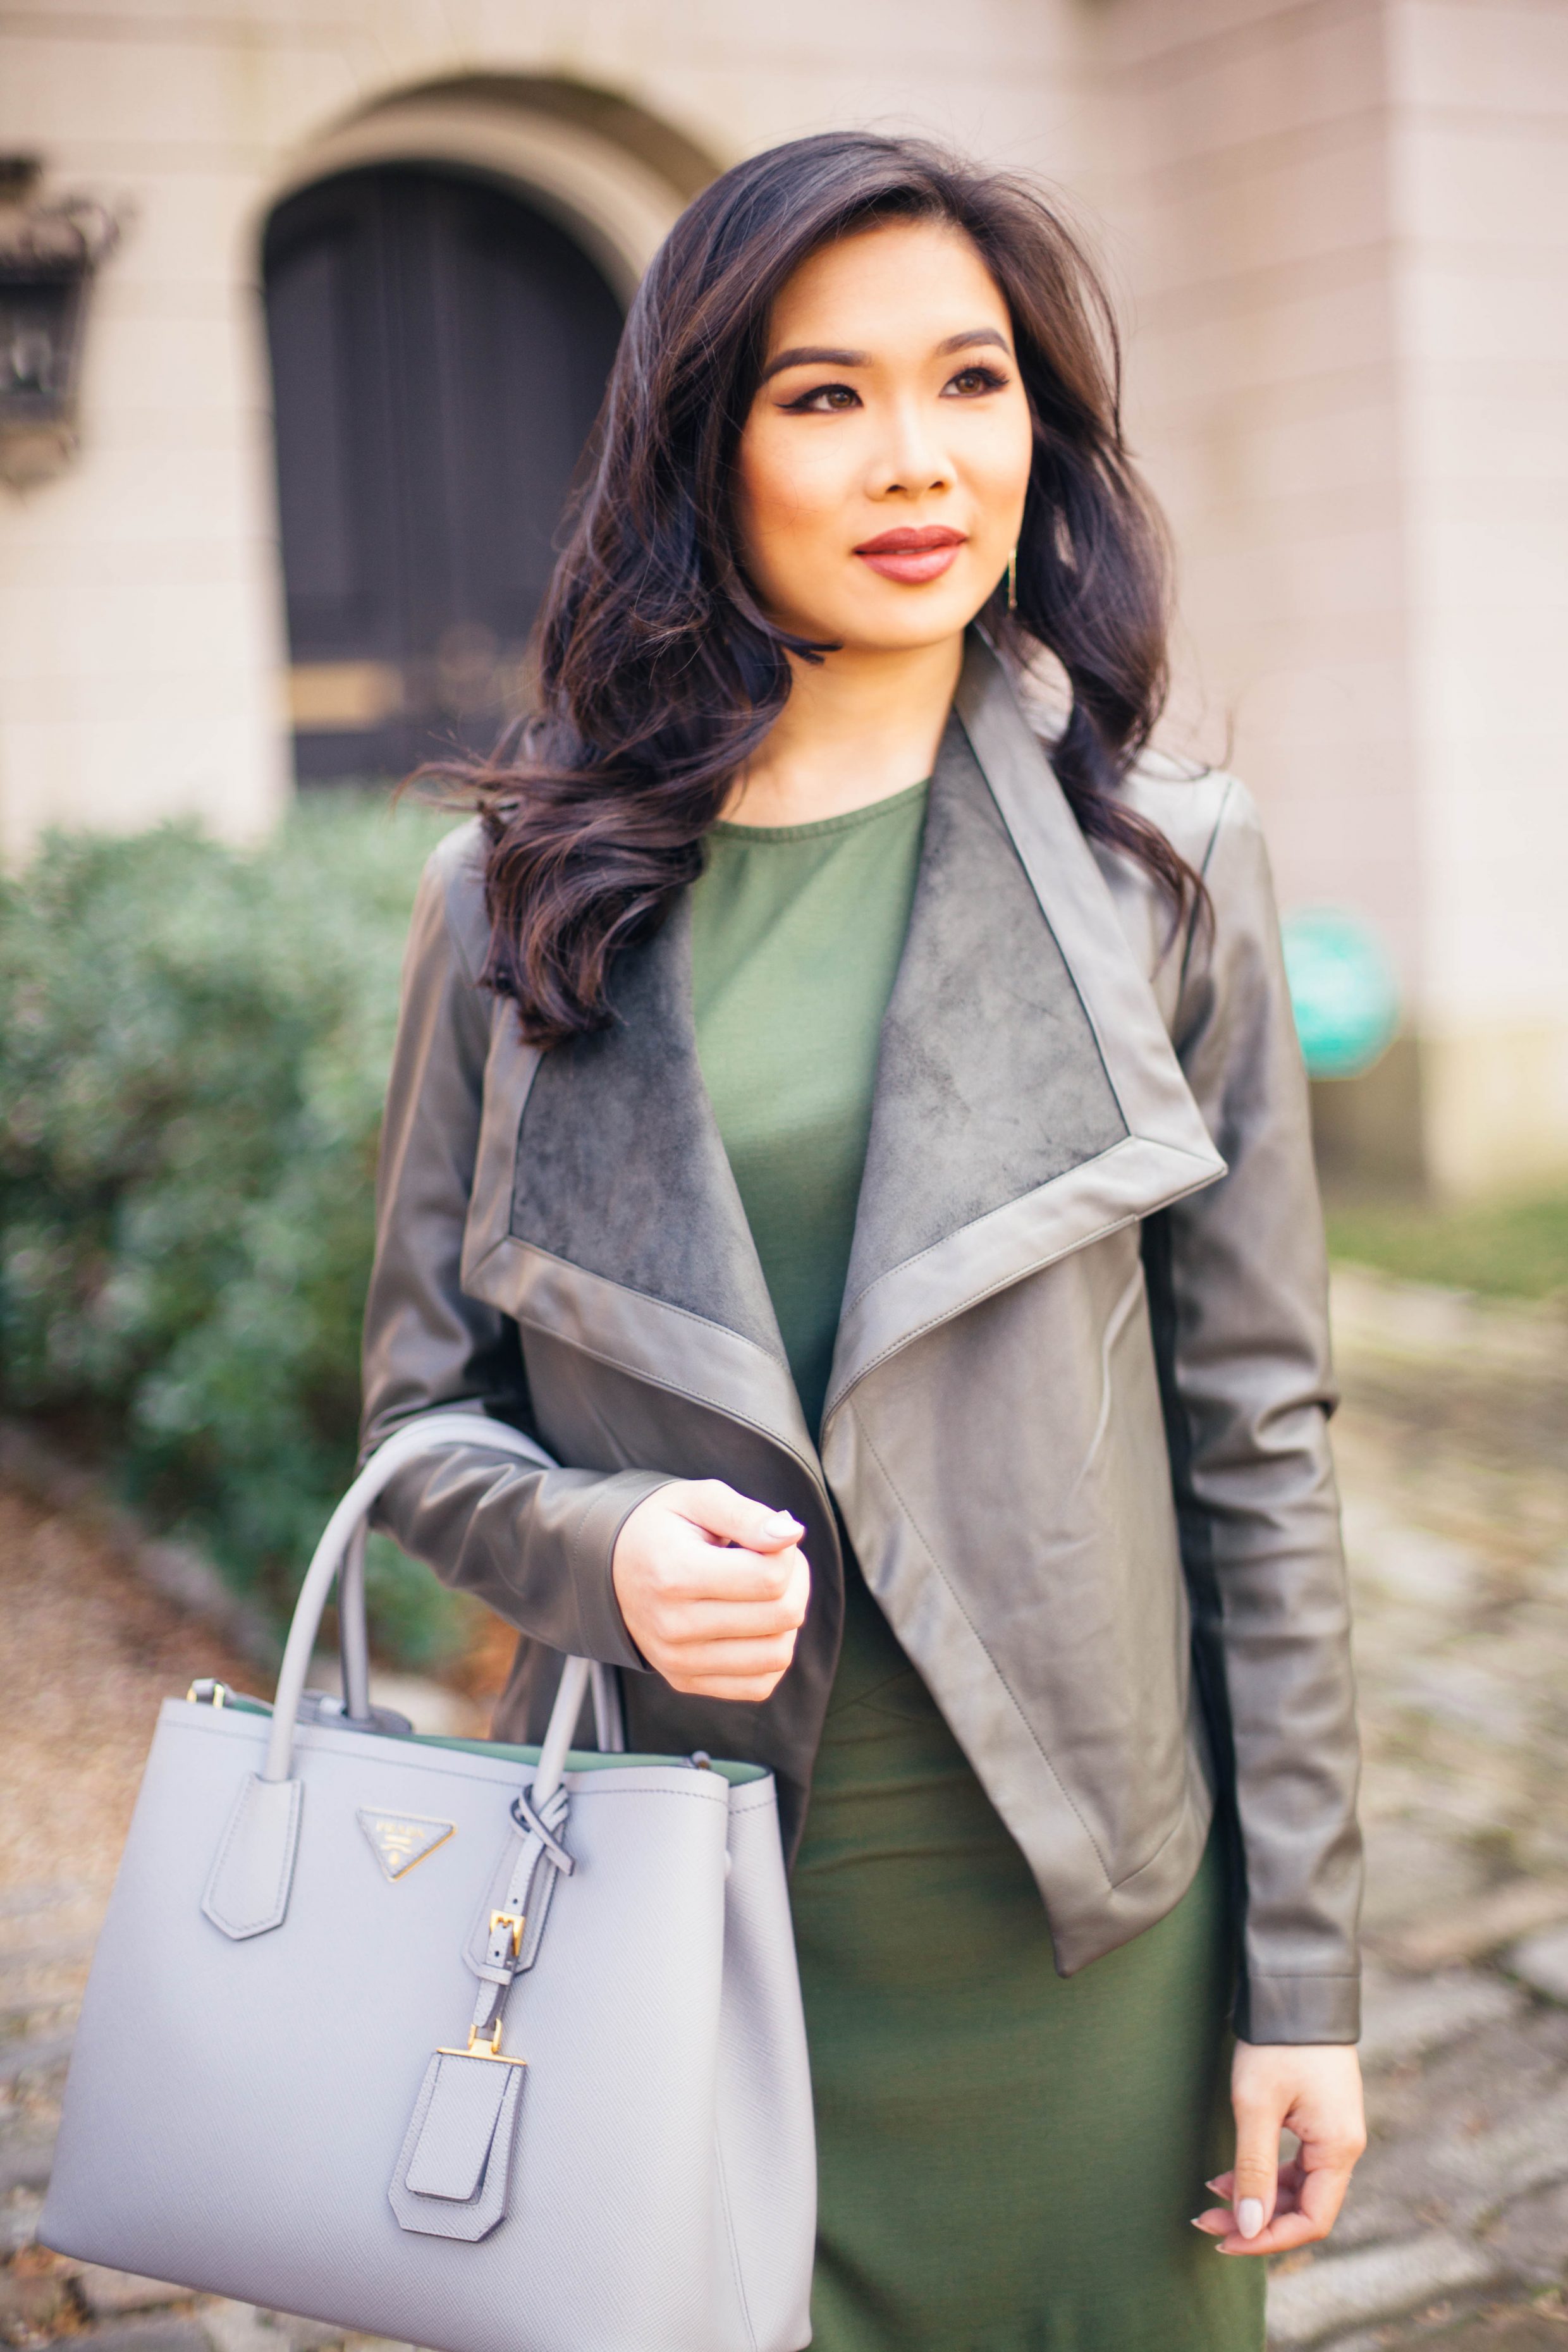 Blogger Hoang-Kim wears the Peppin Coat by BB Dakota, which also comes in six colors